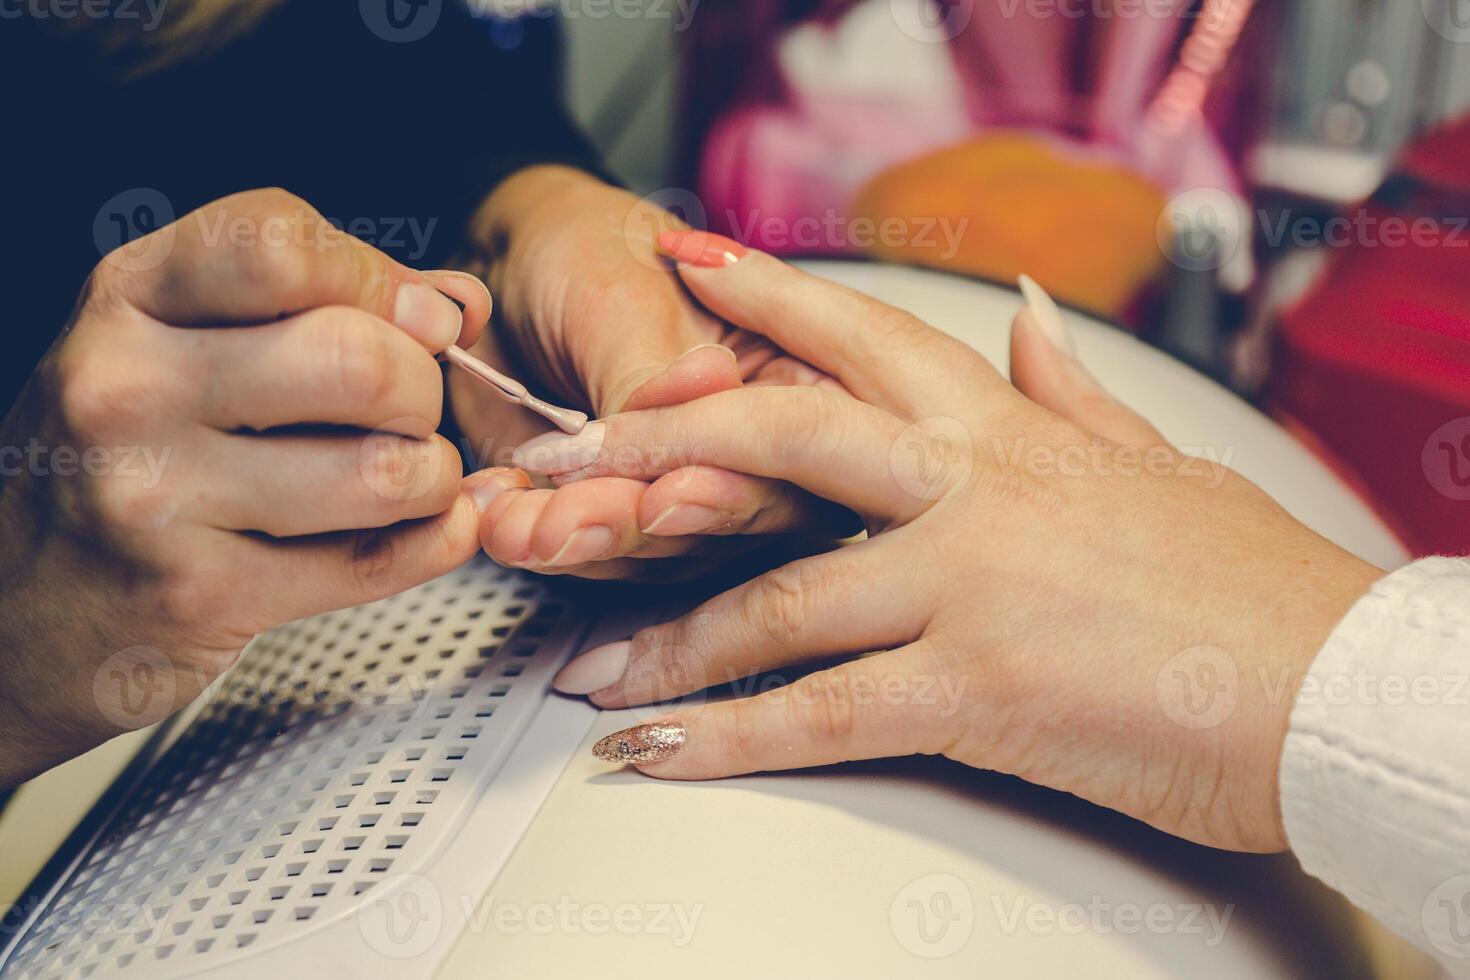 Girl paint nails in the salon of manicure, close-up photo